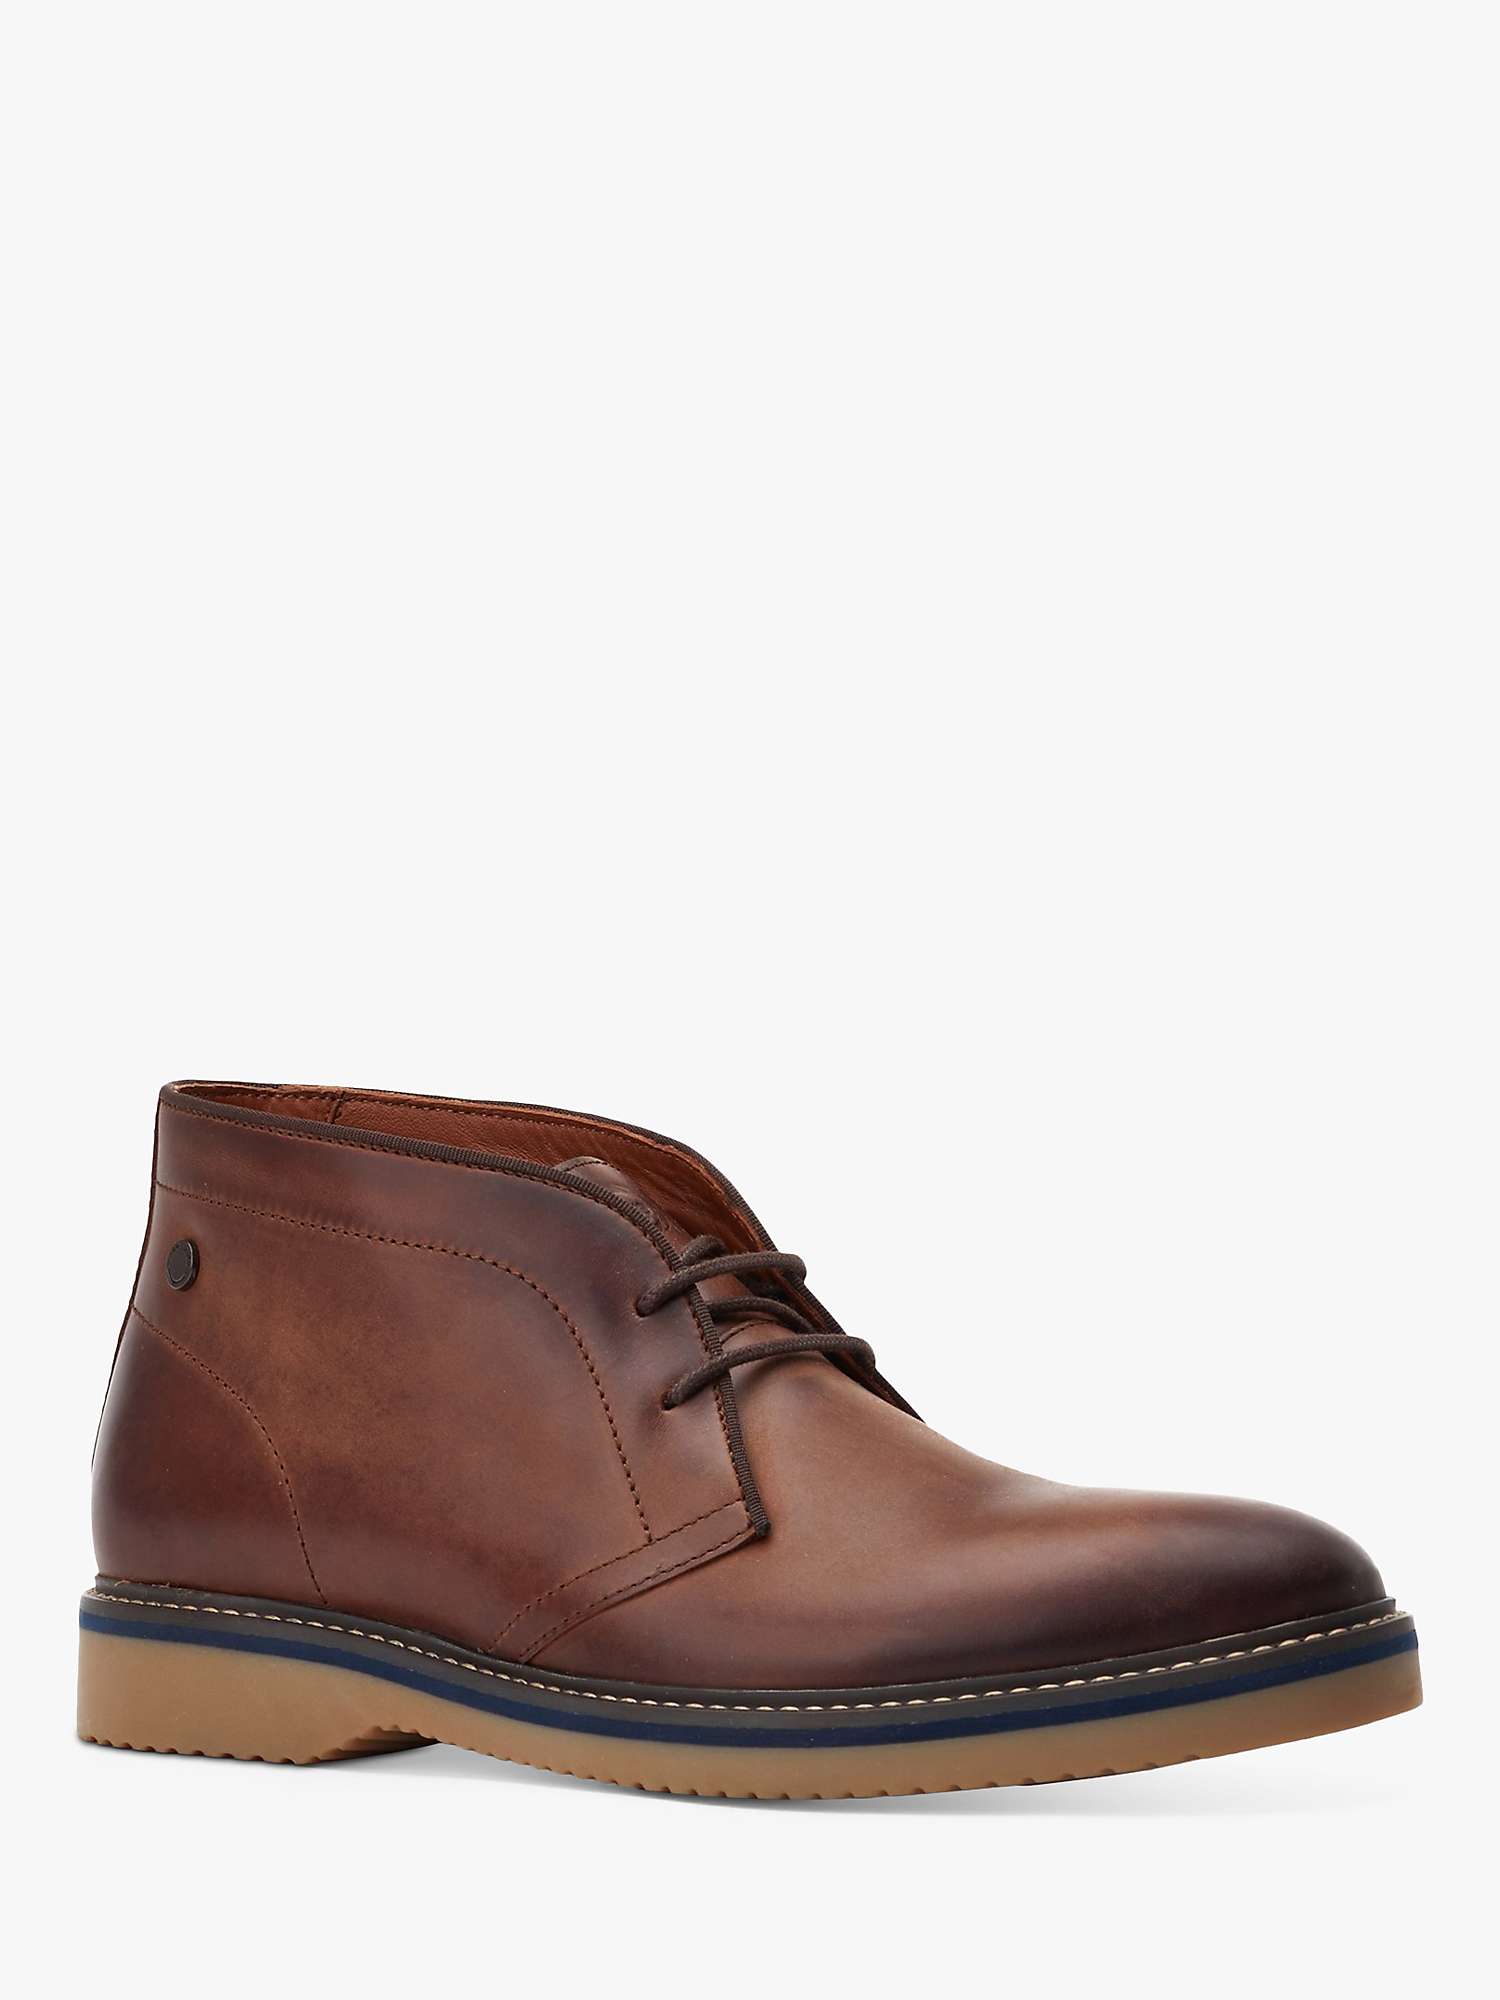 Buy Base London Brody Leather Chukka Boots, Burnt Brown Online at johnlewis.com